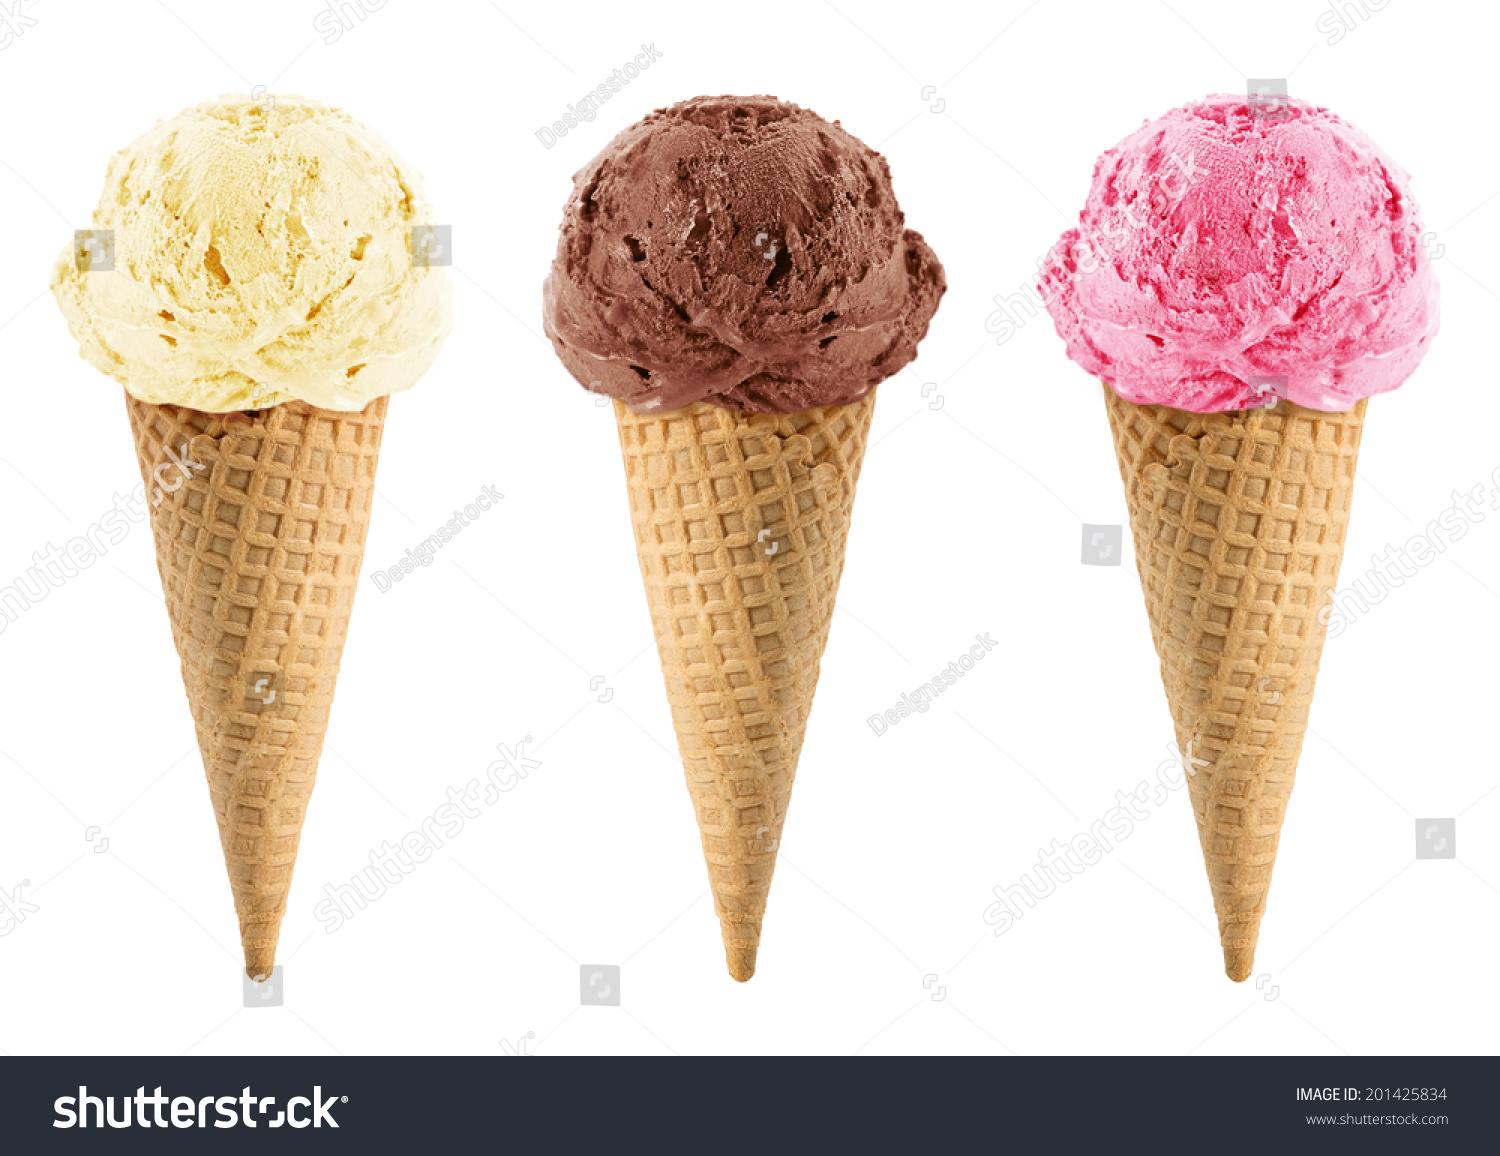 Chocolate, vanilla and strawberry Ice cream in the cone on white background with clipping path. #201425834